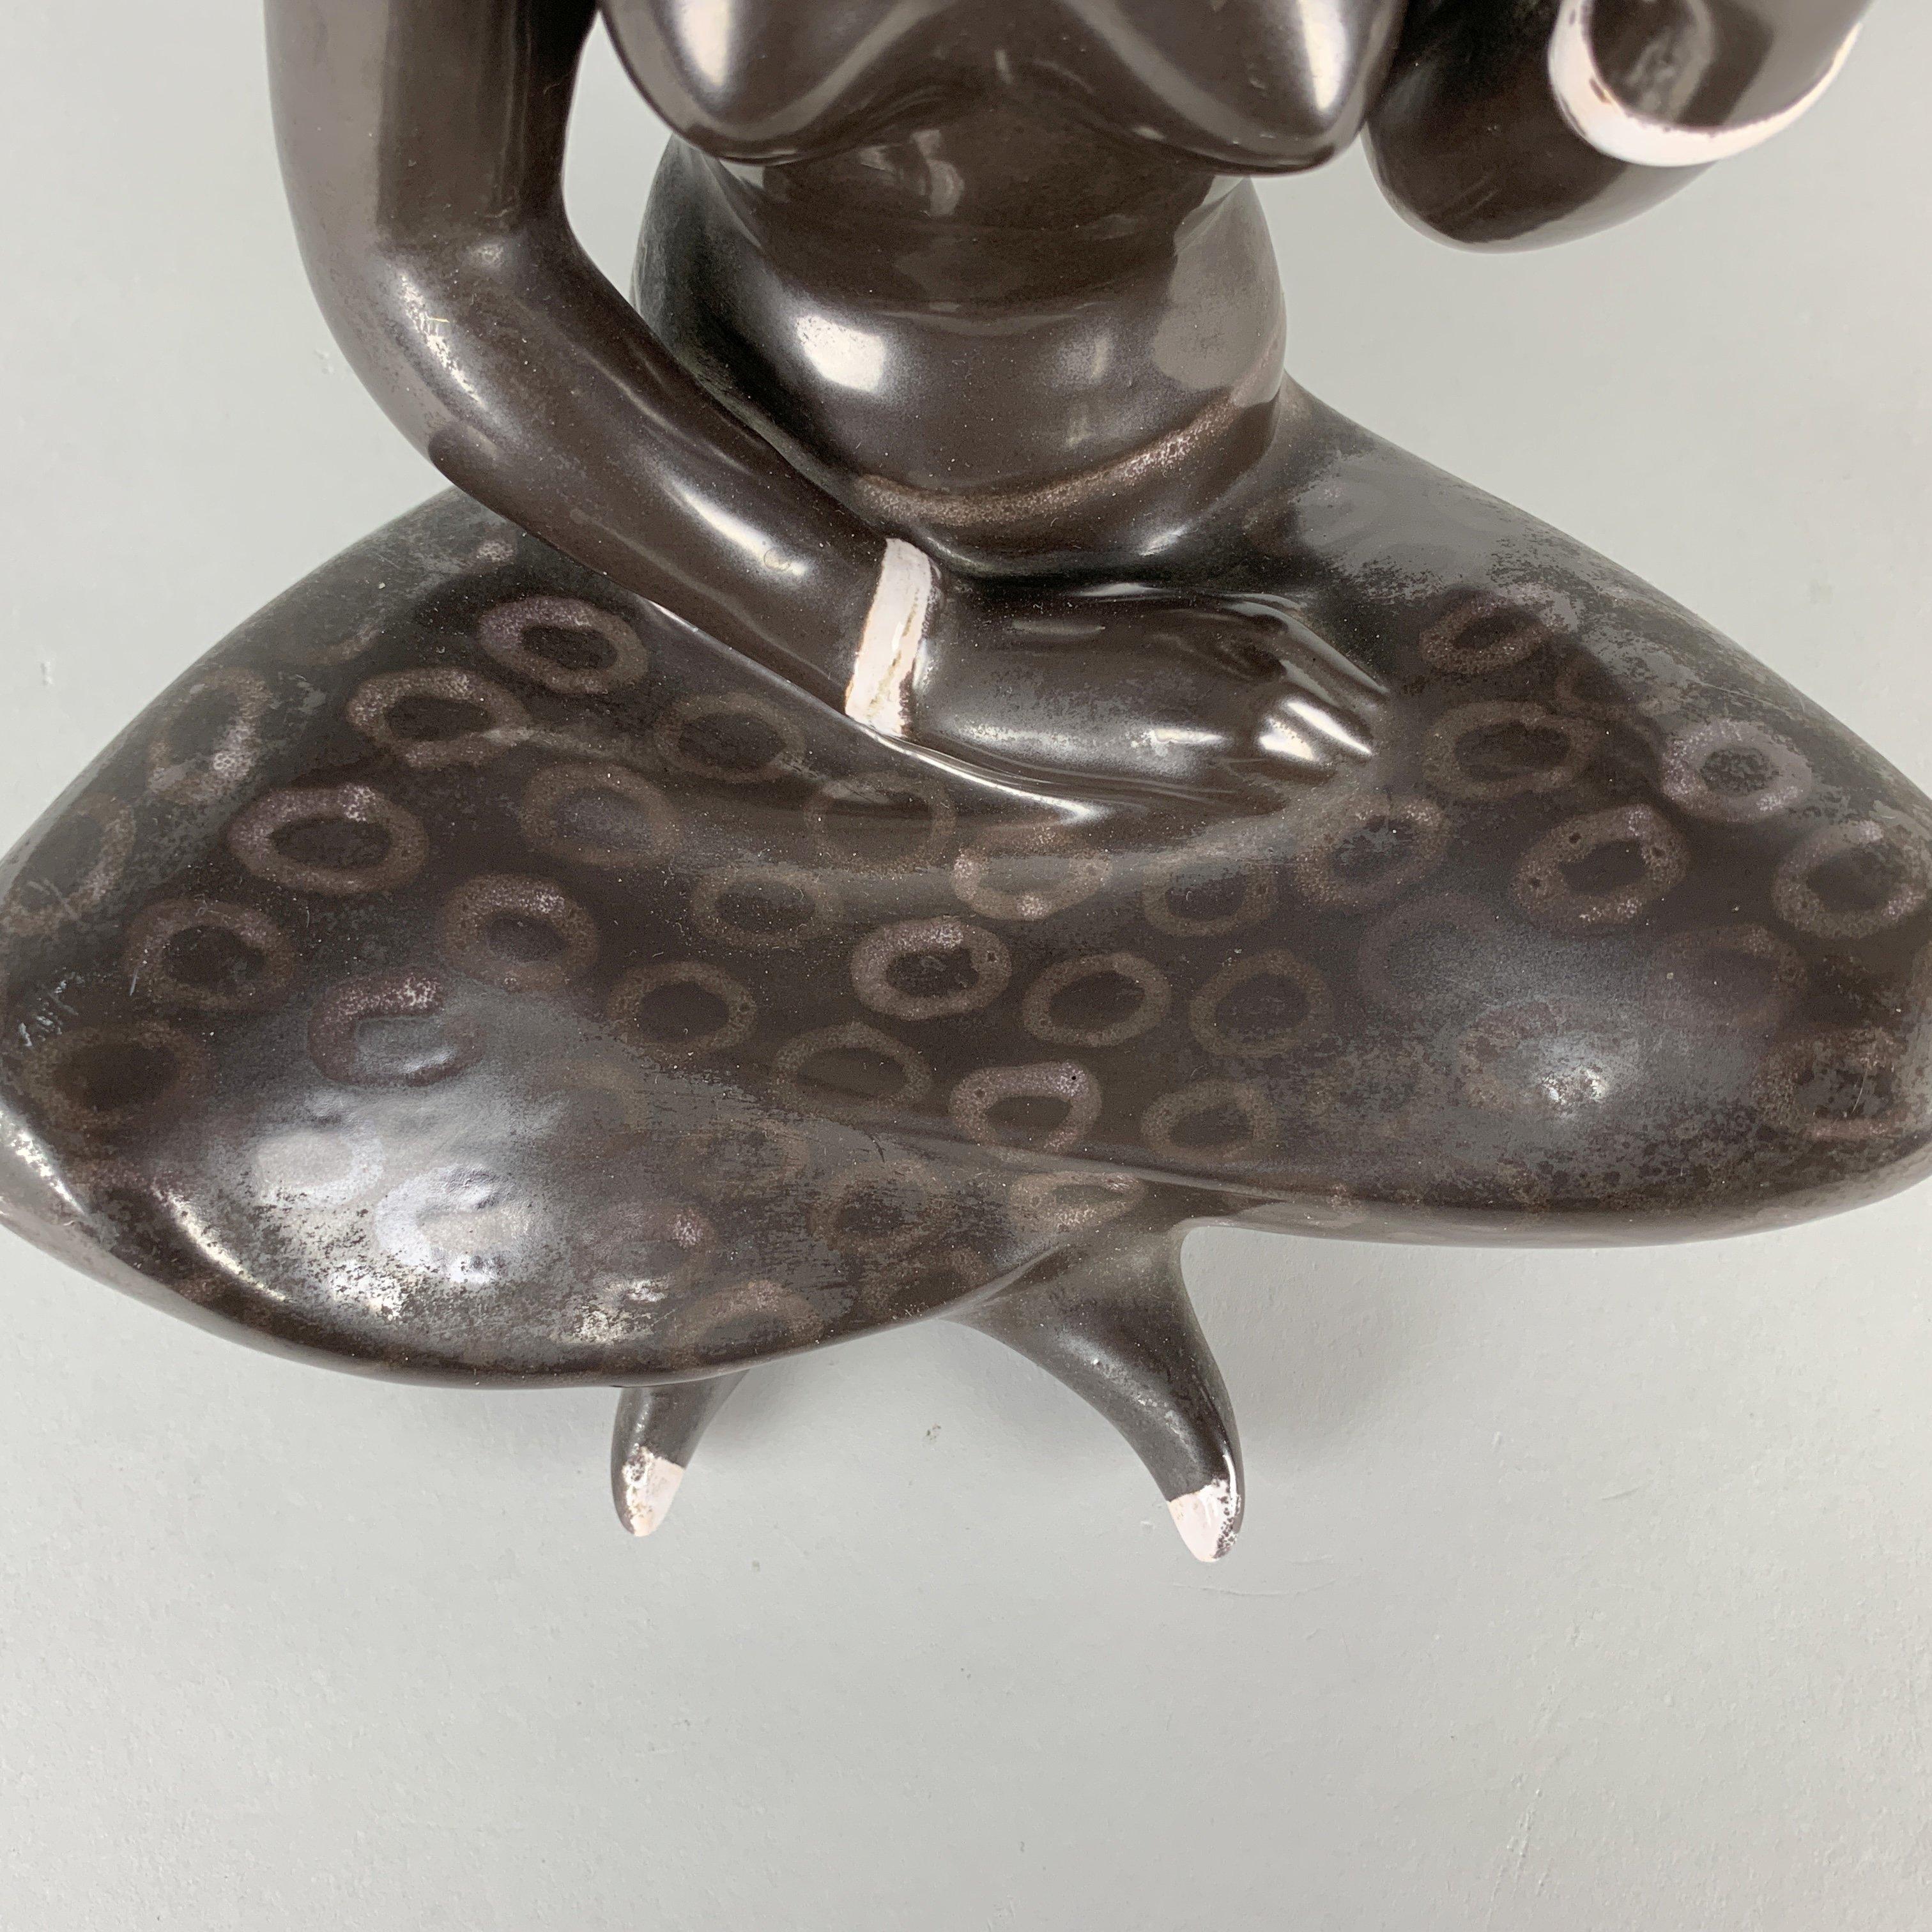 Midcentury Sculpture by Jitka Forejtova for Keramos, 1960s For Sale 1